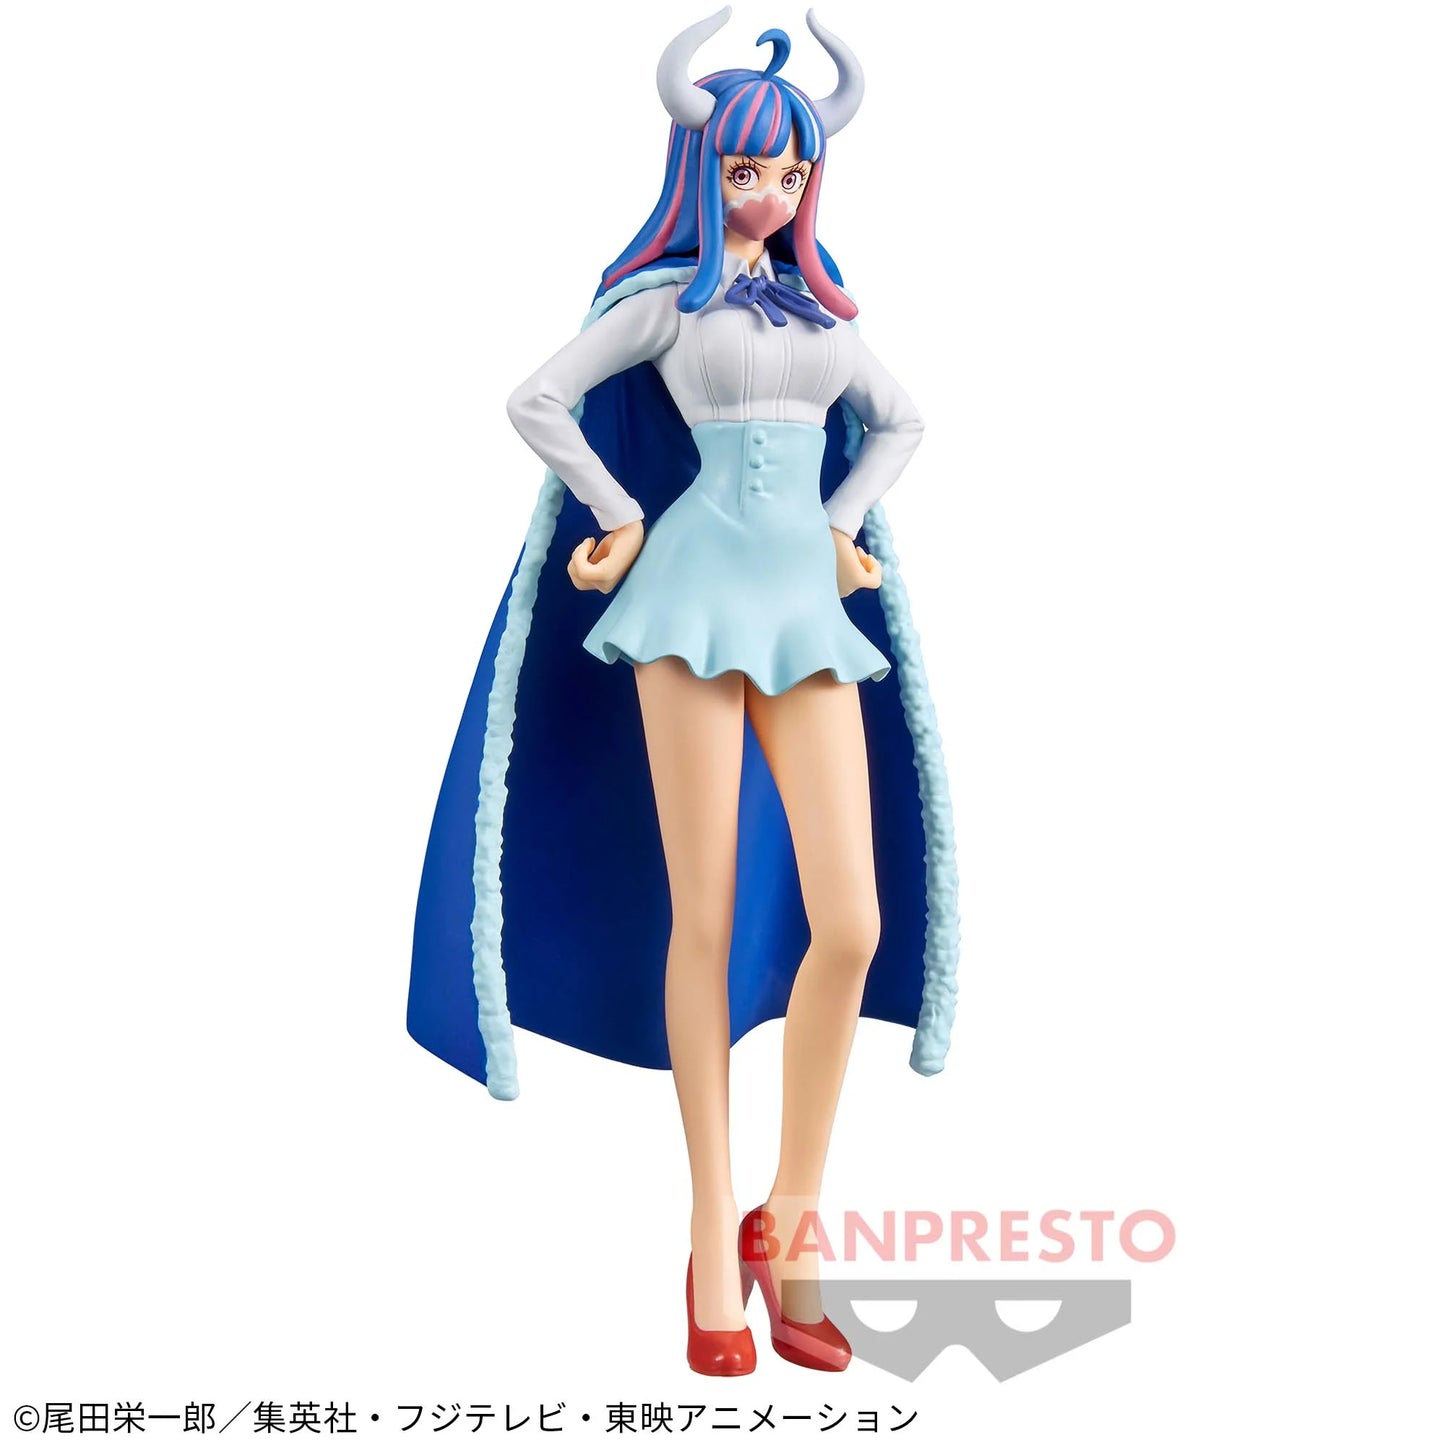 One Piece DXF The Grandline Lady Wano Country Ulti Figure for Sale